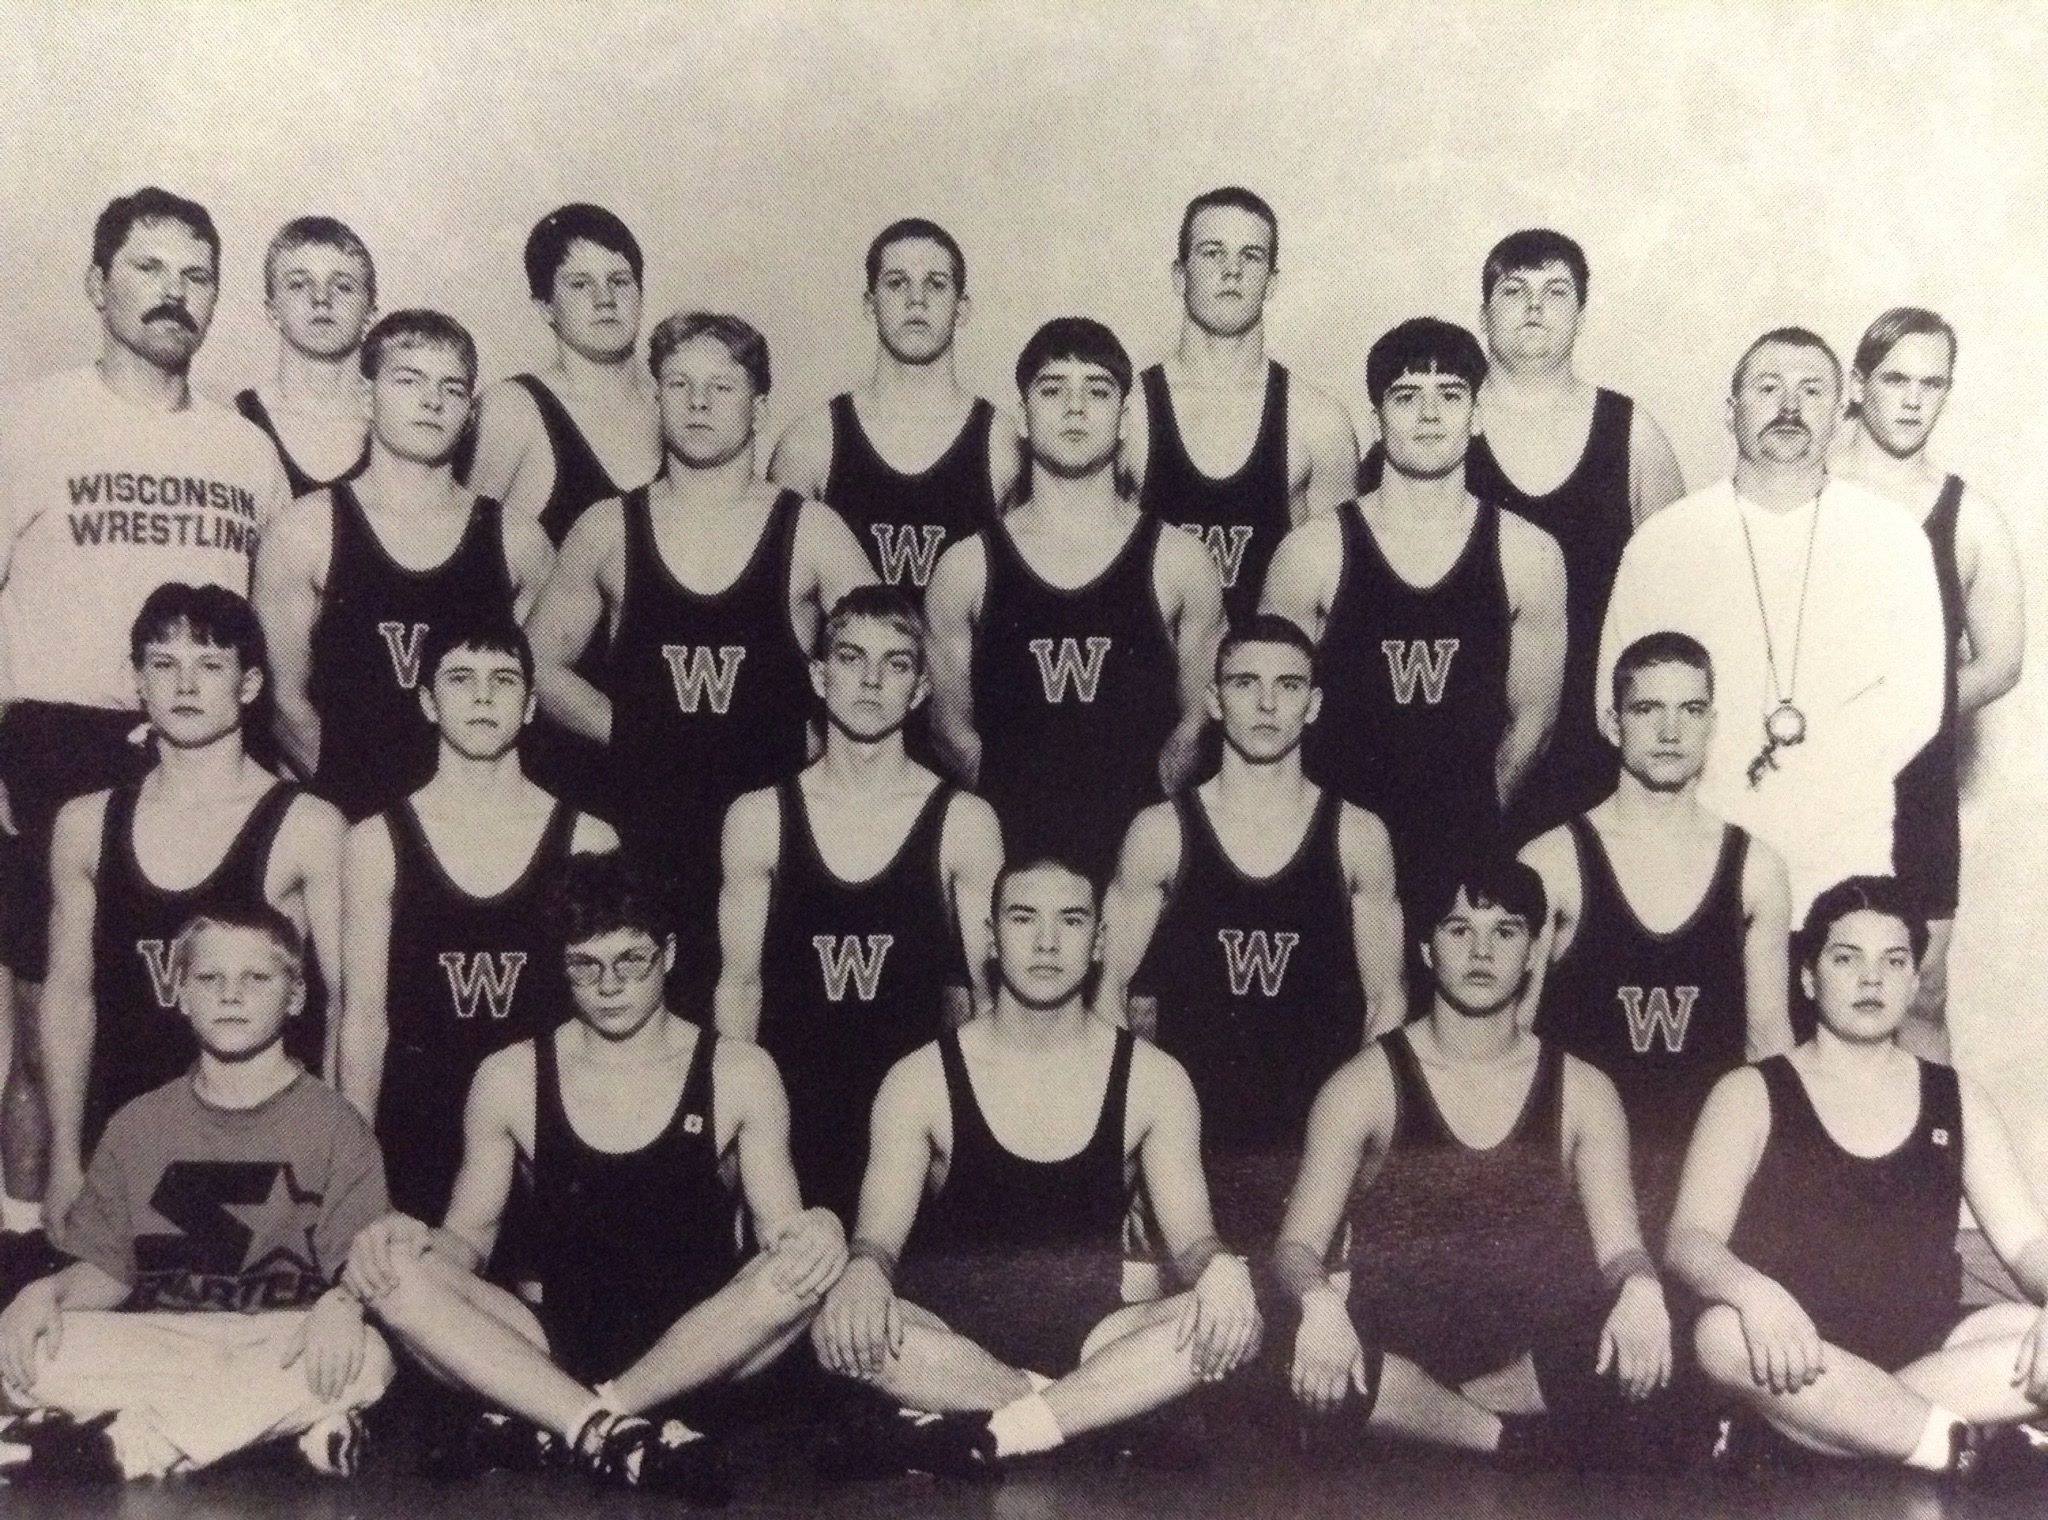 1995-1996 Whitehall Norsemen Wrestling Team (Left to right, top to bottom) Head Coach Jeff Hauser, R. Mikelson, T. Danzinger, Arend Geurink, Neal Moen, S. Foss, Jeremy Foss, Lucas Hanson, Ryan Martinovici, Assistant Coach Mark Helgeson, J. Tiffany, Mike Estenson, Josh Borreson, Lee Meinerz, Jasen Anderson, Manager P. Hanson, S. Newman, Cy Getts, Jeff Nelson, R. Oddness